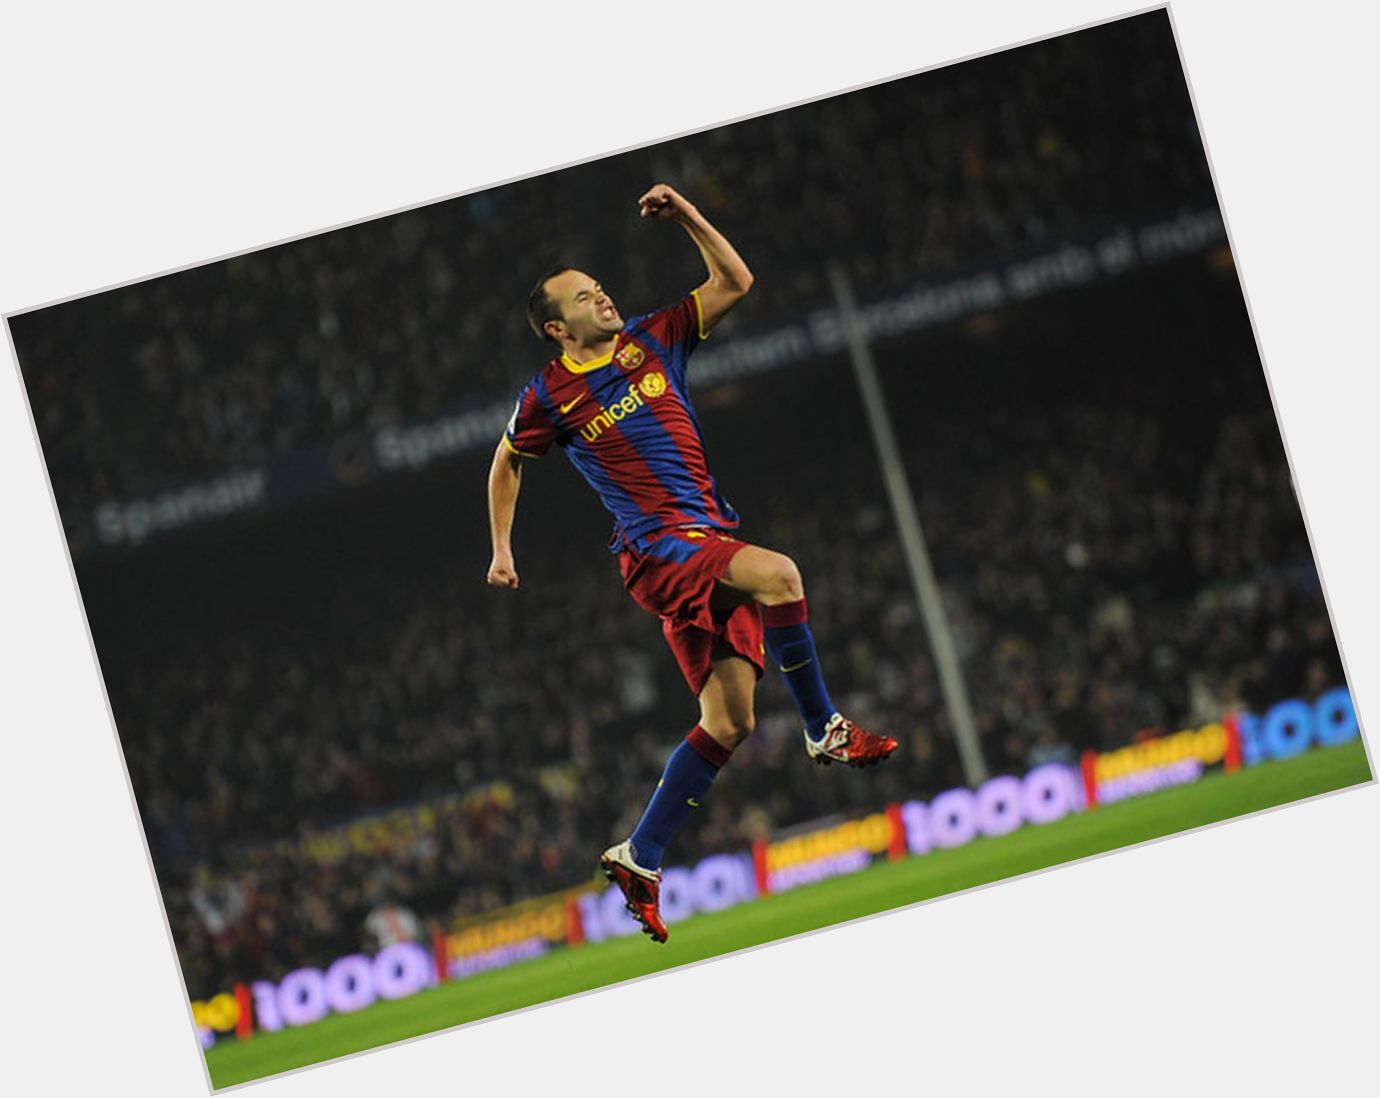 A very happy birthday to Don Andres Iniesta   